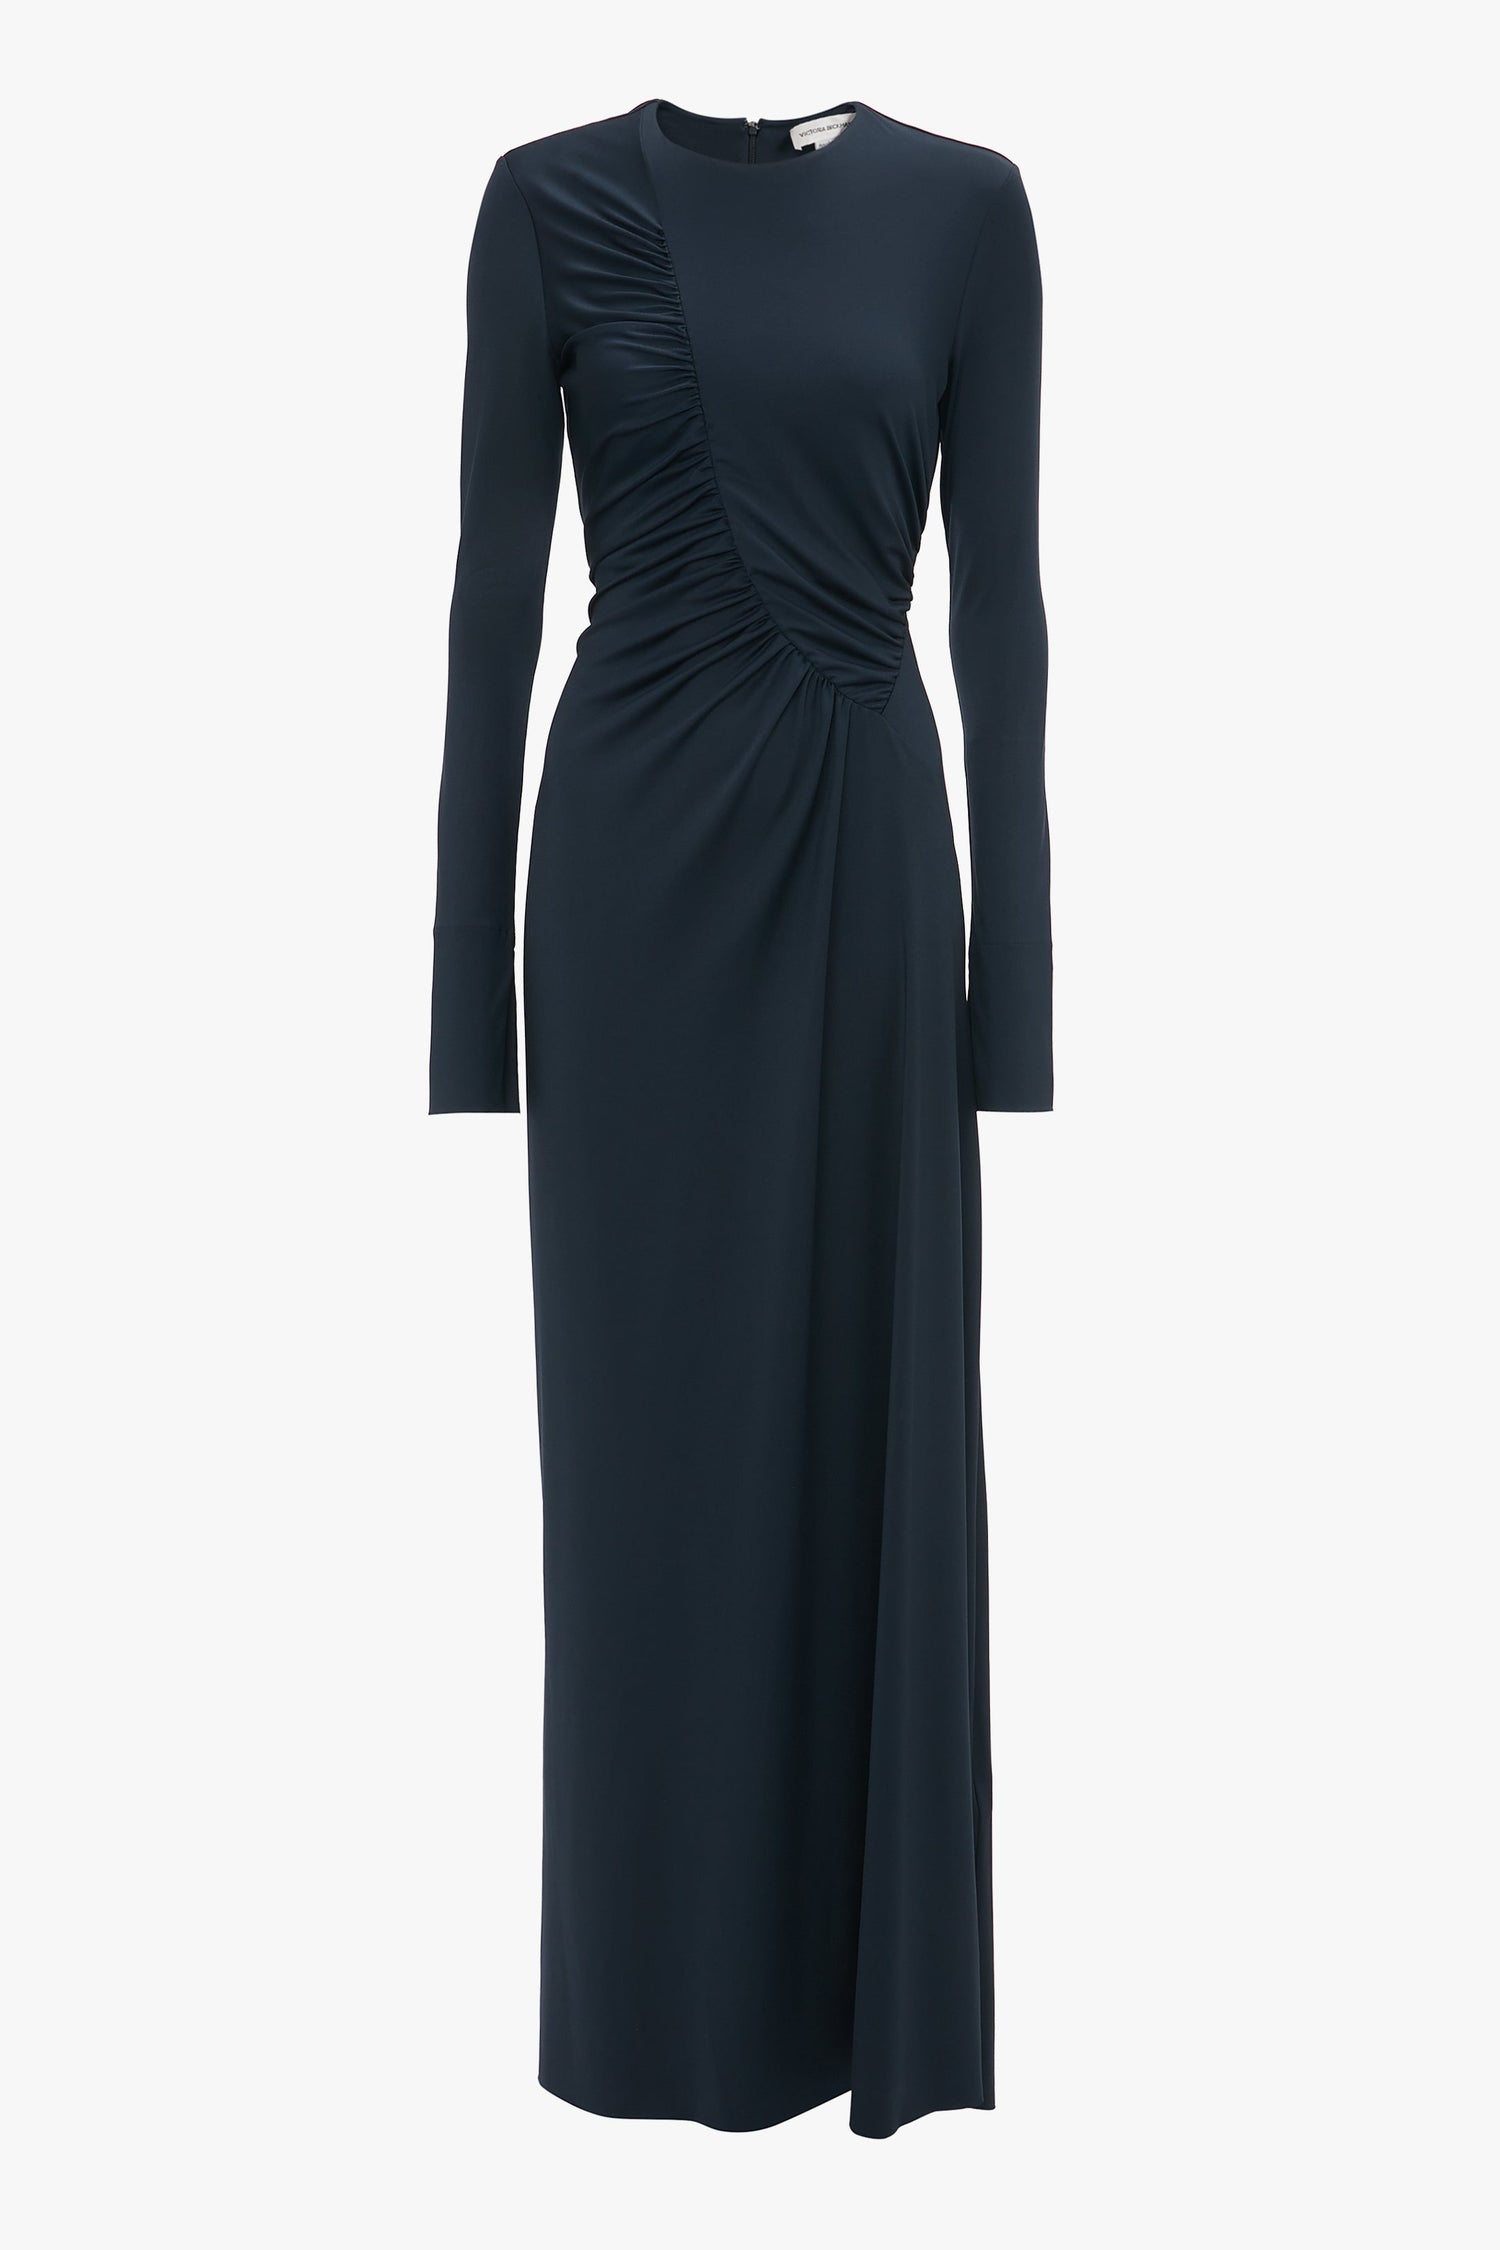 A long-sleeve, floor-length navy blue Ruched Detail Floor-Length Gown In Midnight by Victoria Beckham features gathered ruching on the front and a high neckline, perfect for evening occasions.